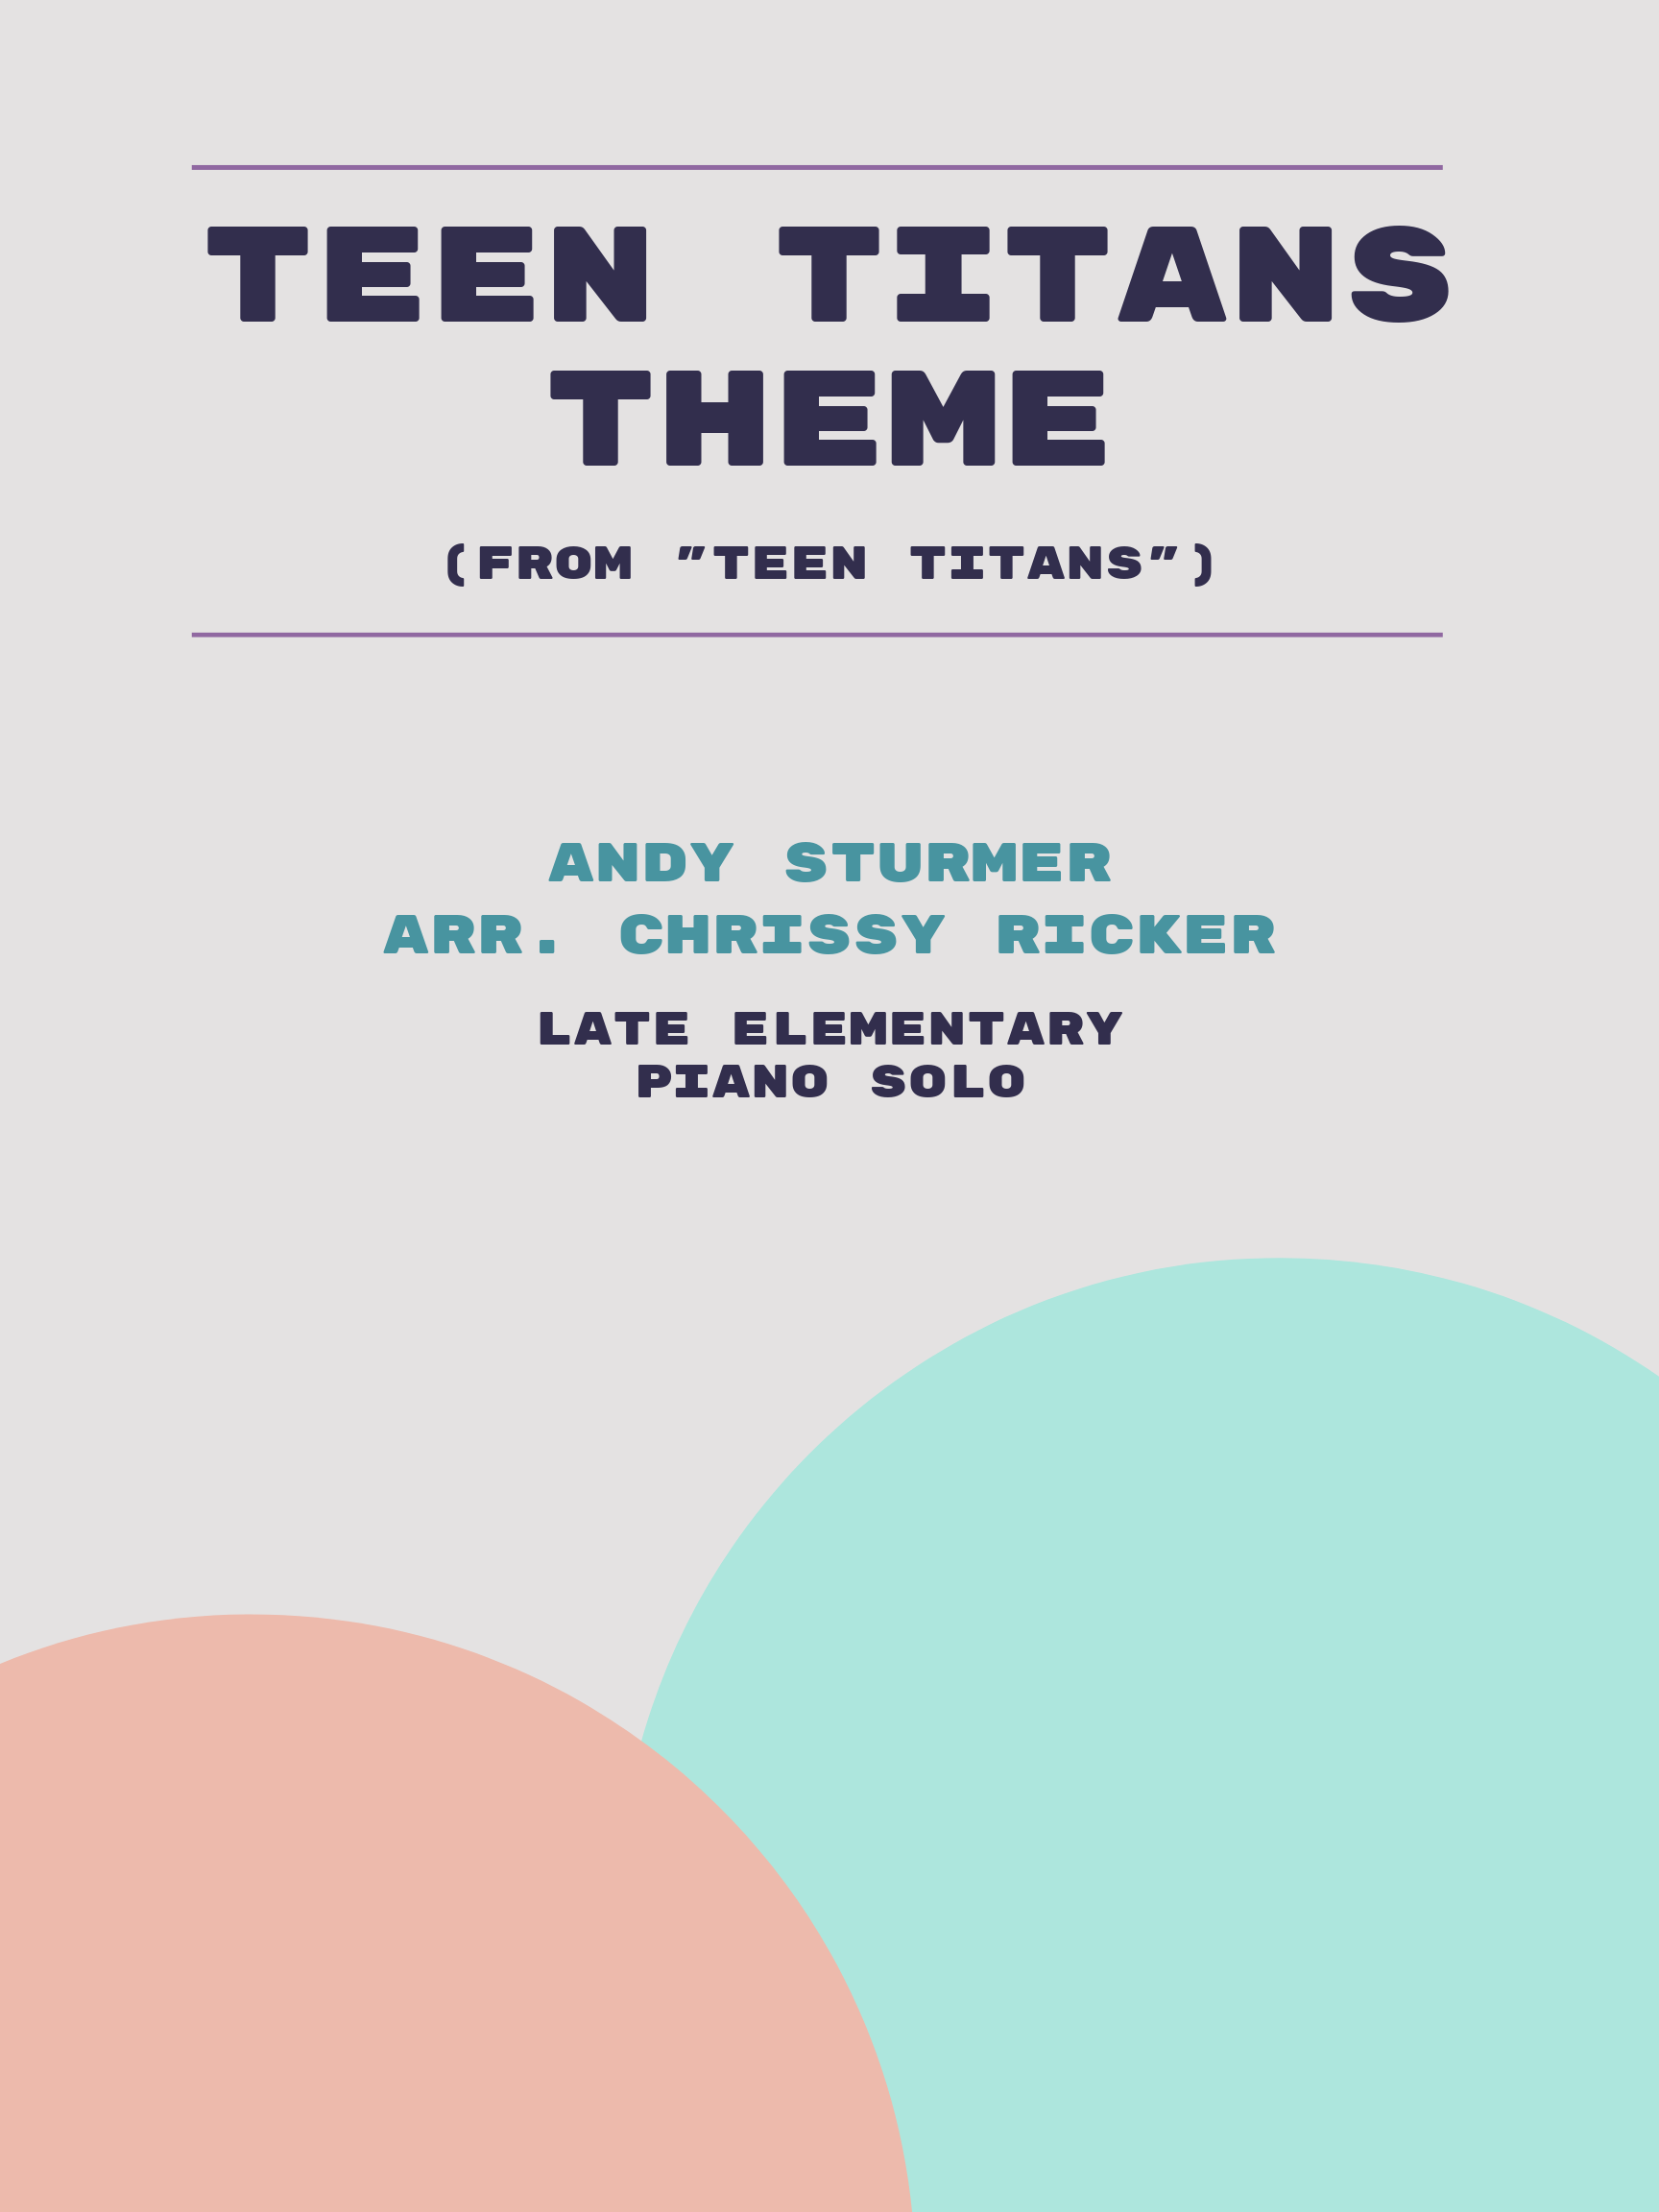 Teen Titans Theme by Andy Sturmer